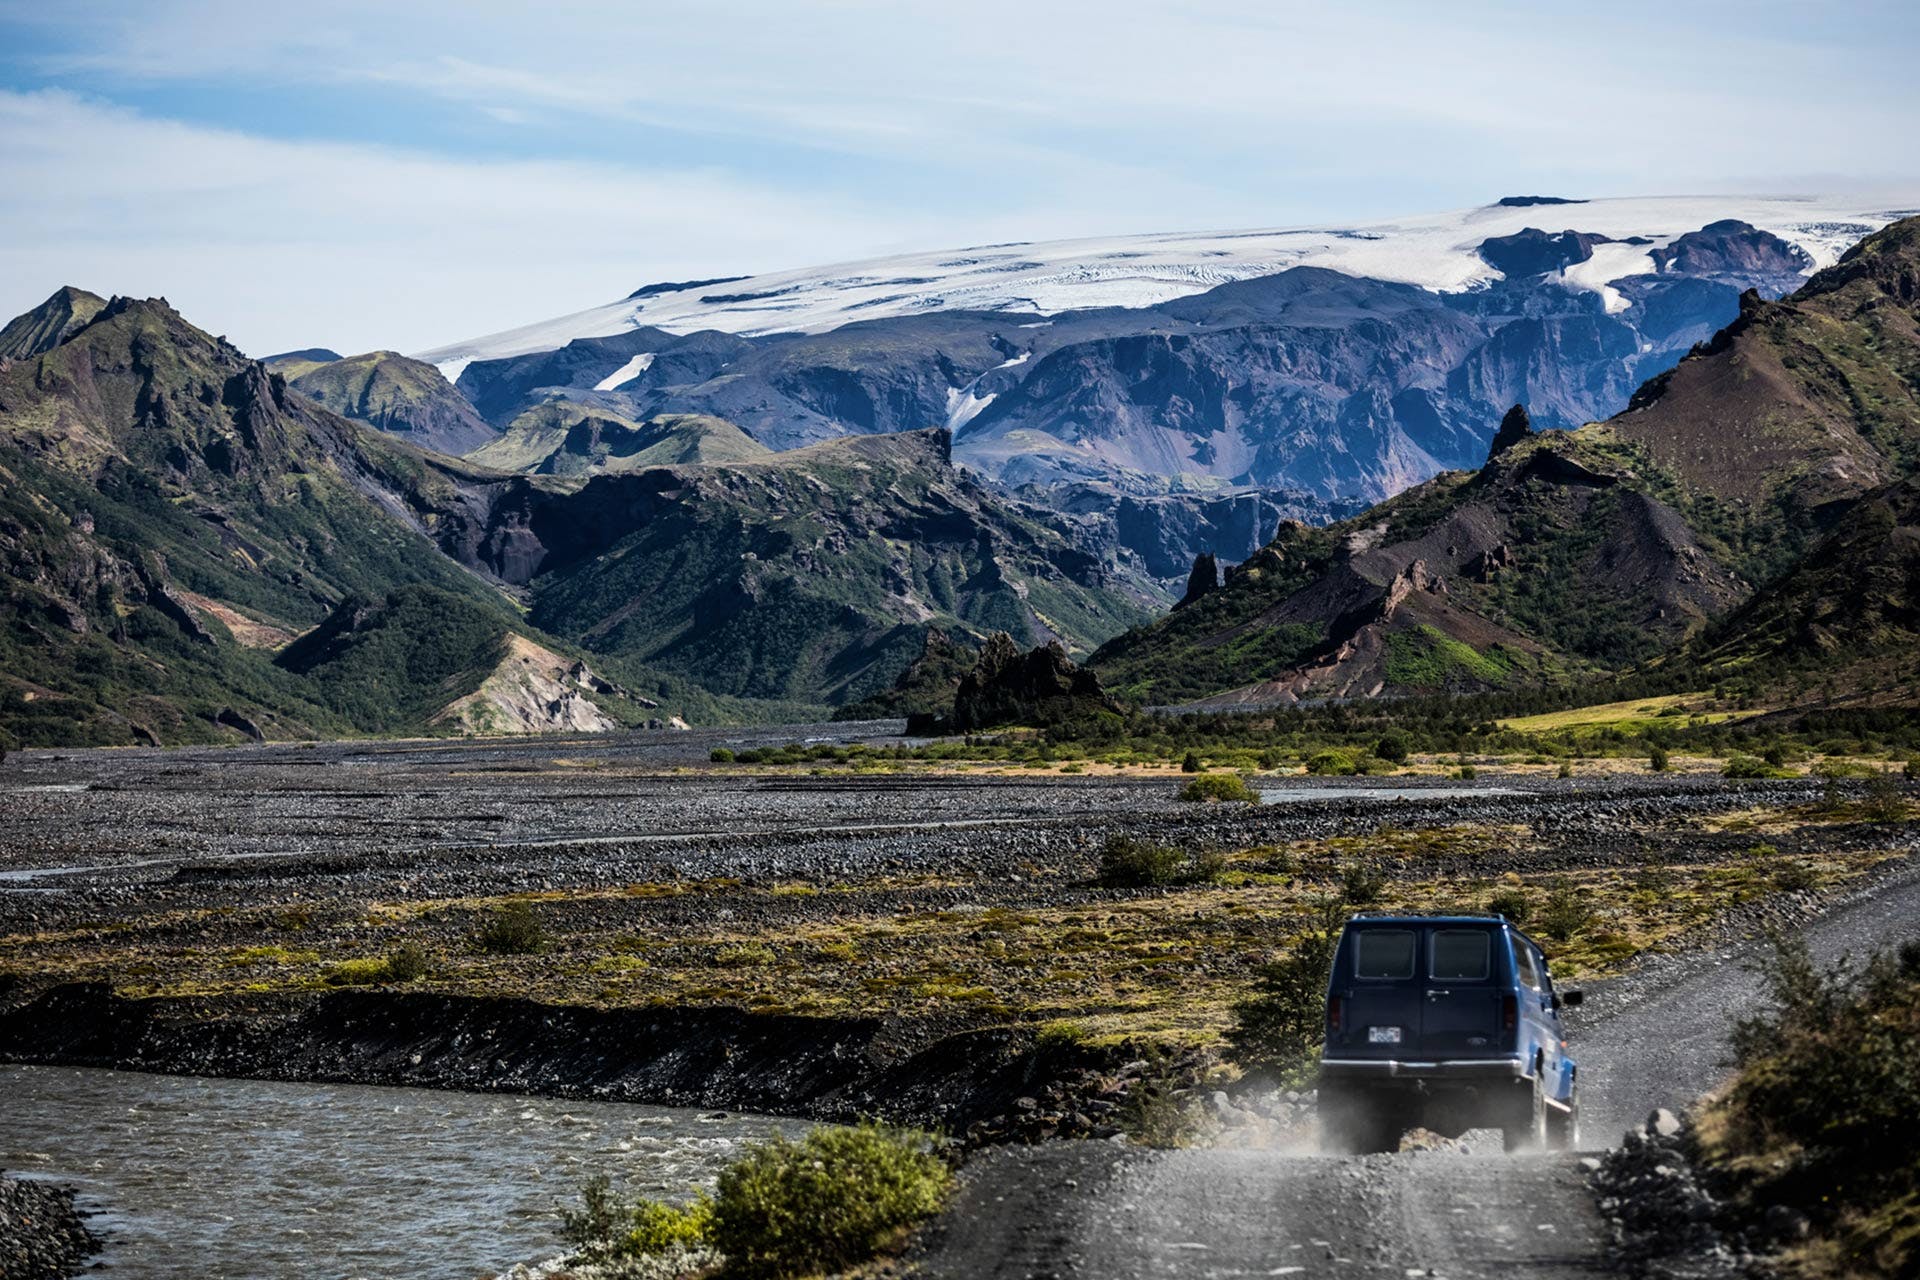 Drive past mighty glaciers and icy rivers to get to the beautiful Þórsmörk valley in the Icelandic Highlands.